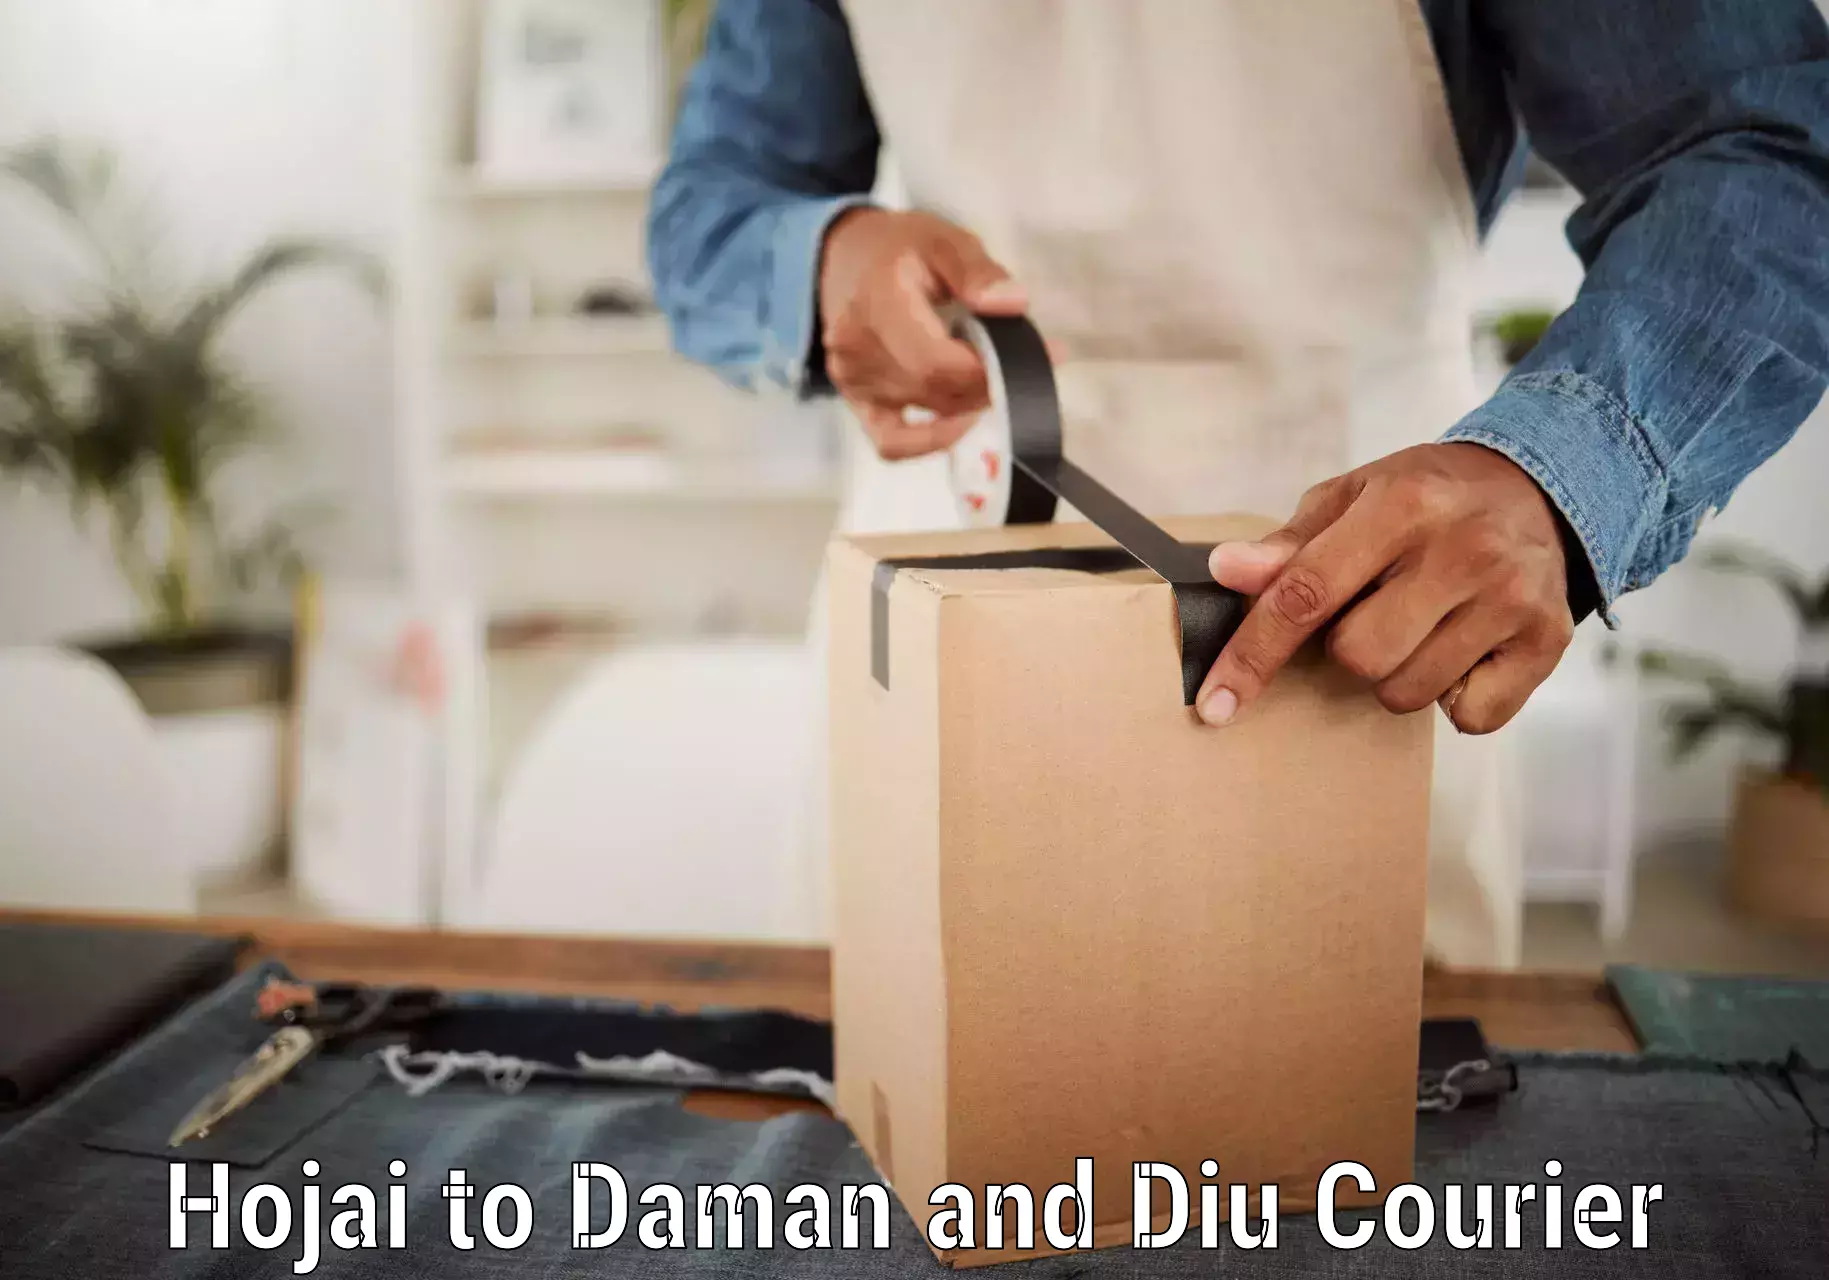 Automated shipping processes Hojai to Diu